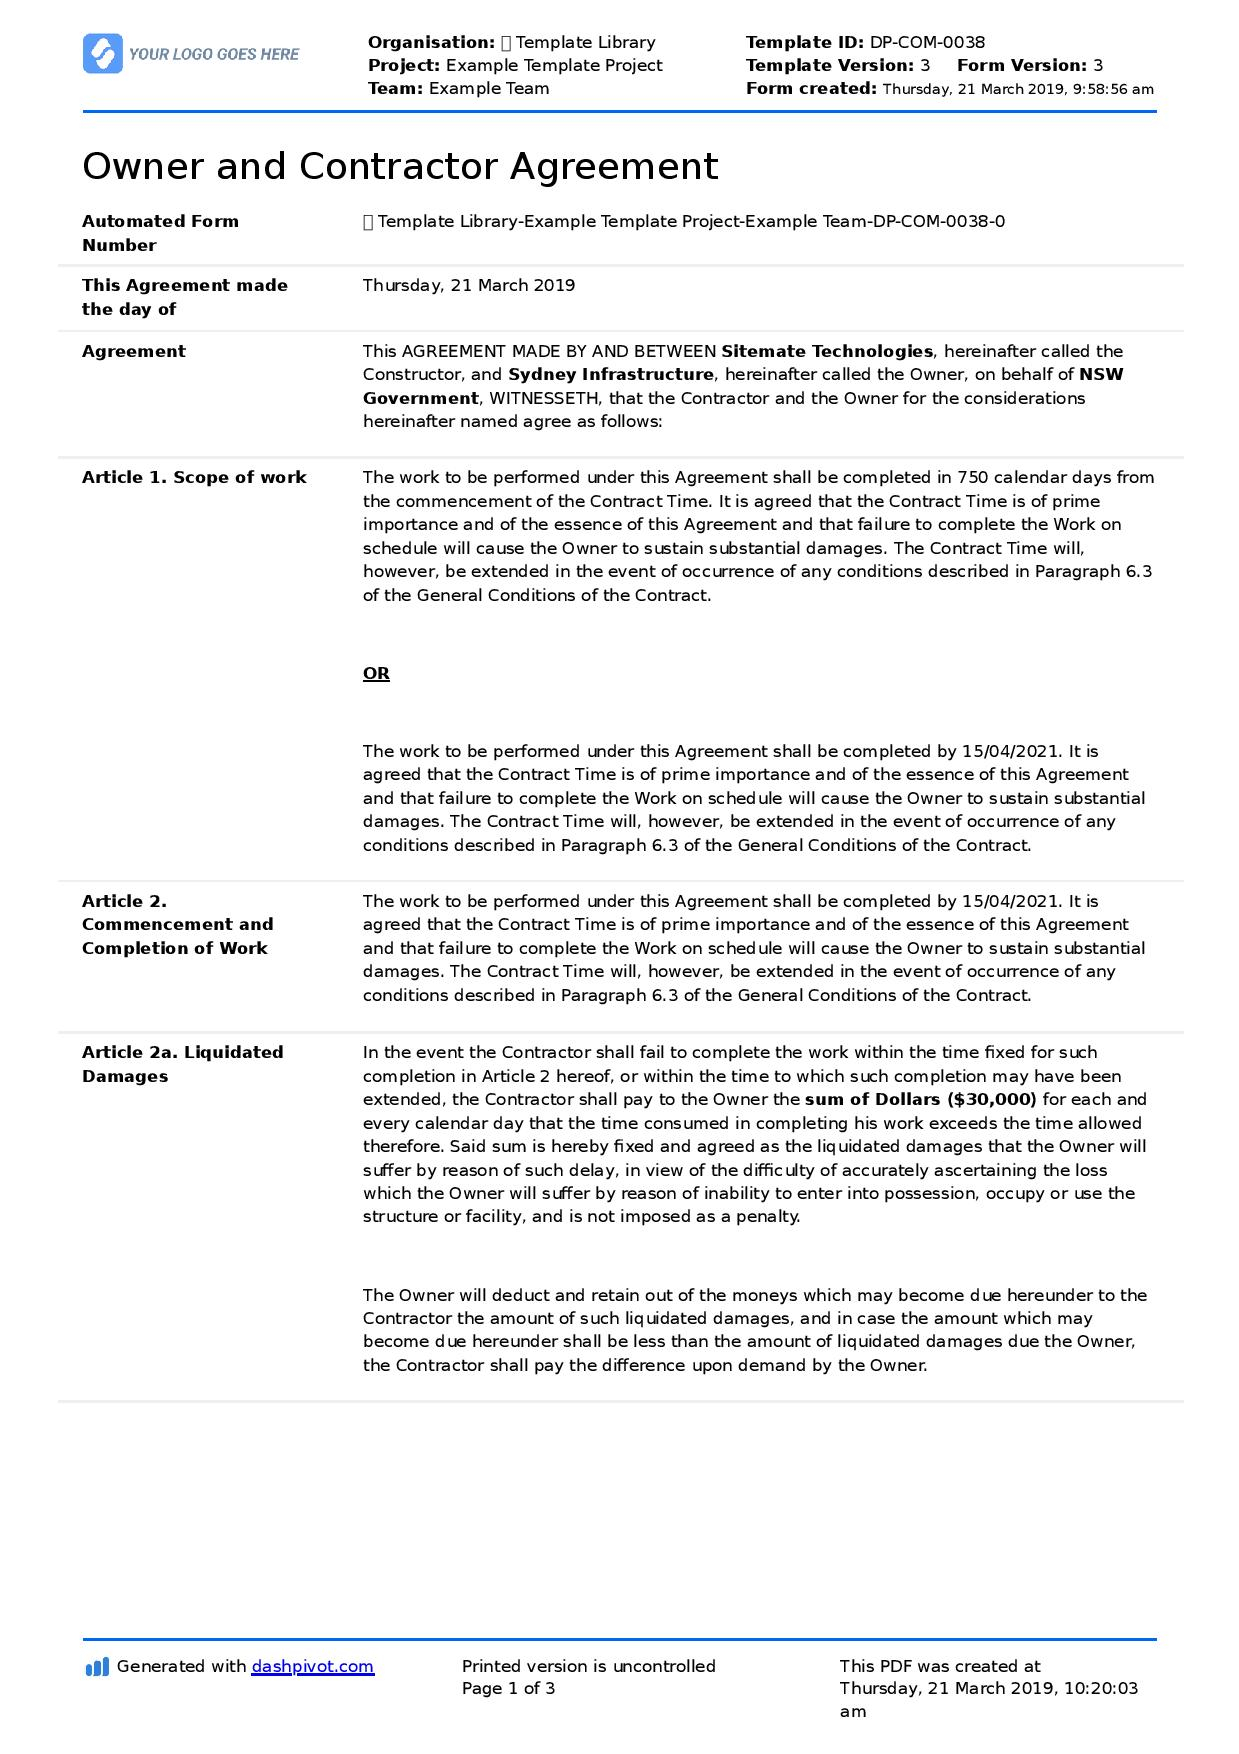 Simple Agreement Contract Agreement Between Owner And Contractor Sample Pdf Template